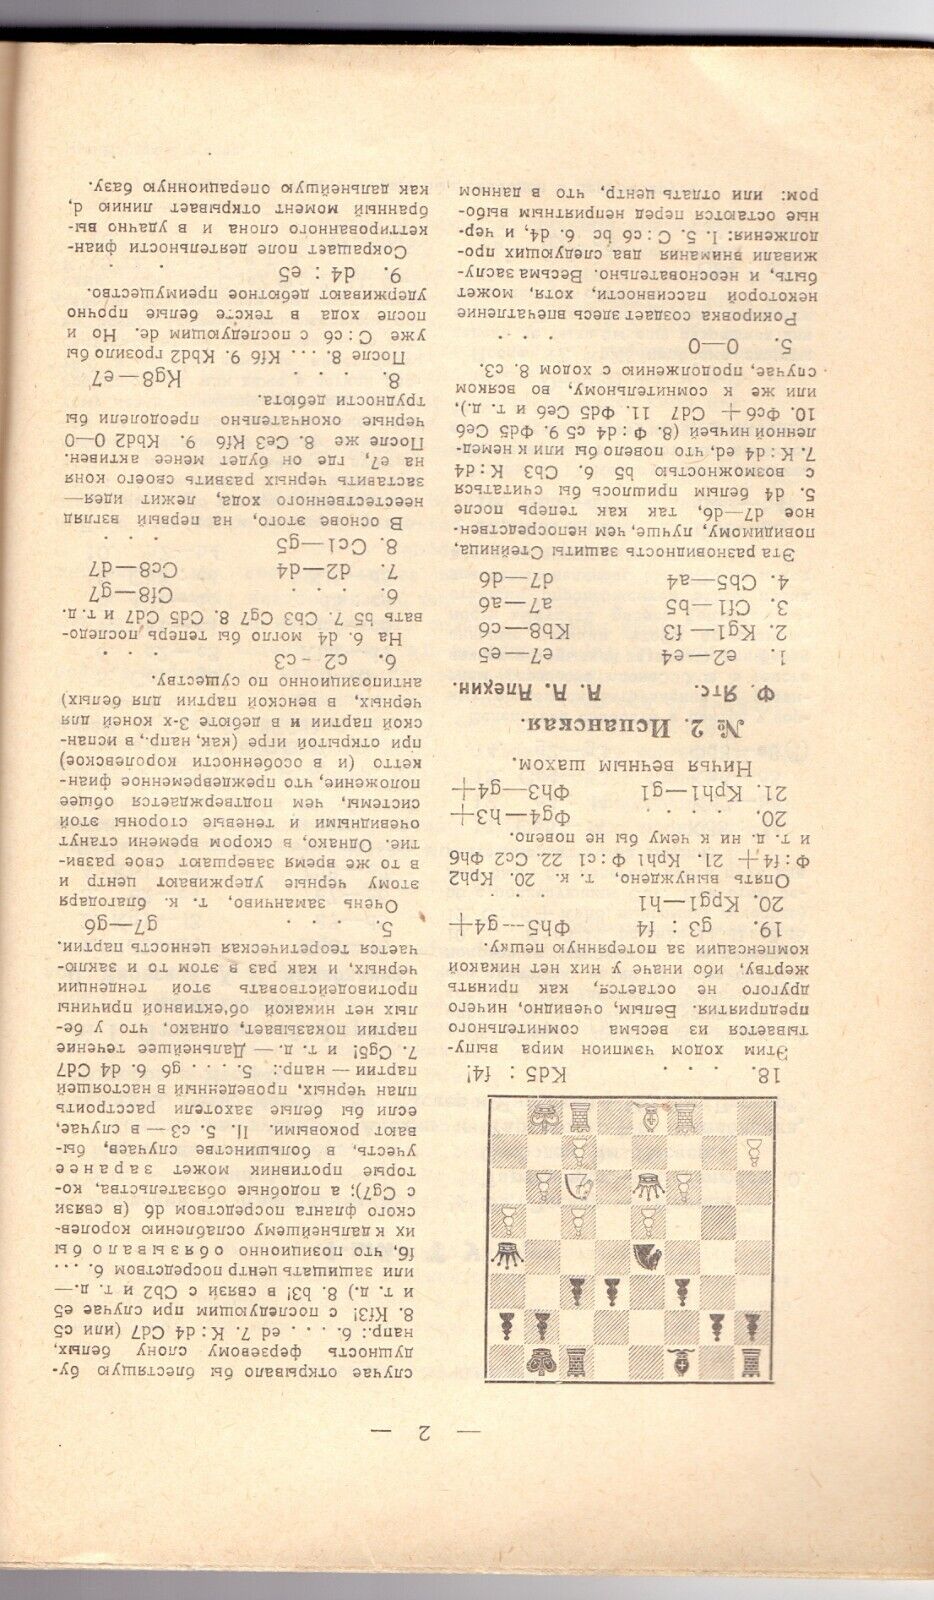 The book of the New York international chess tournament, 1924